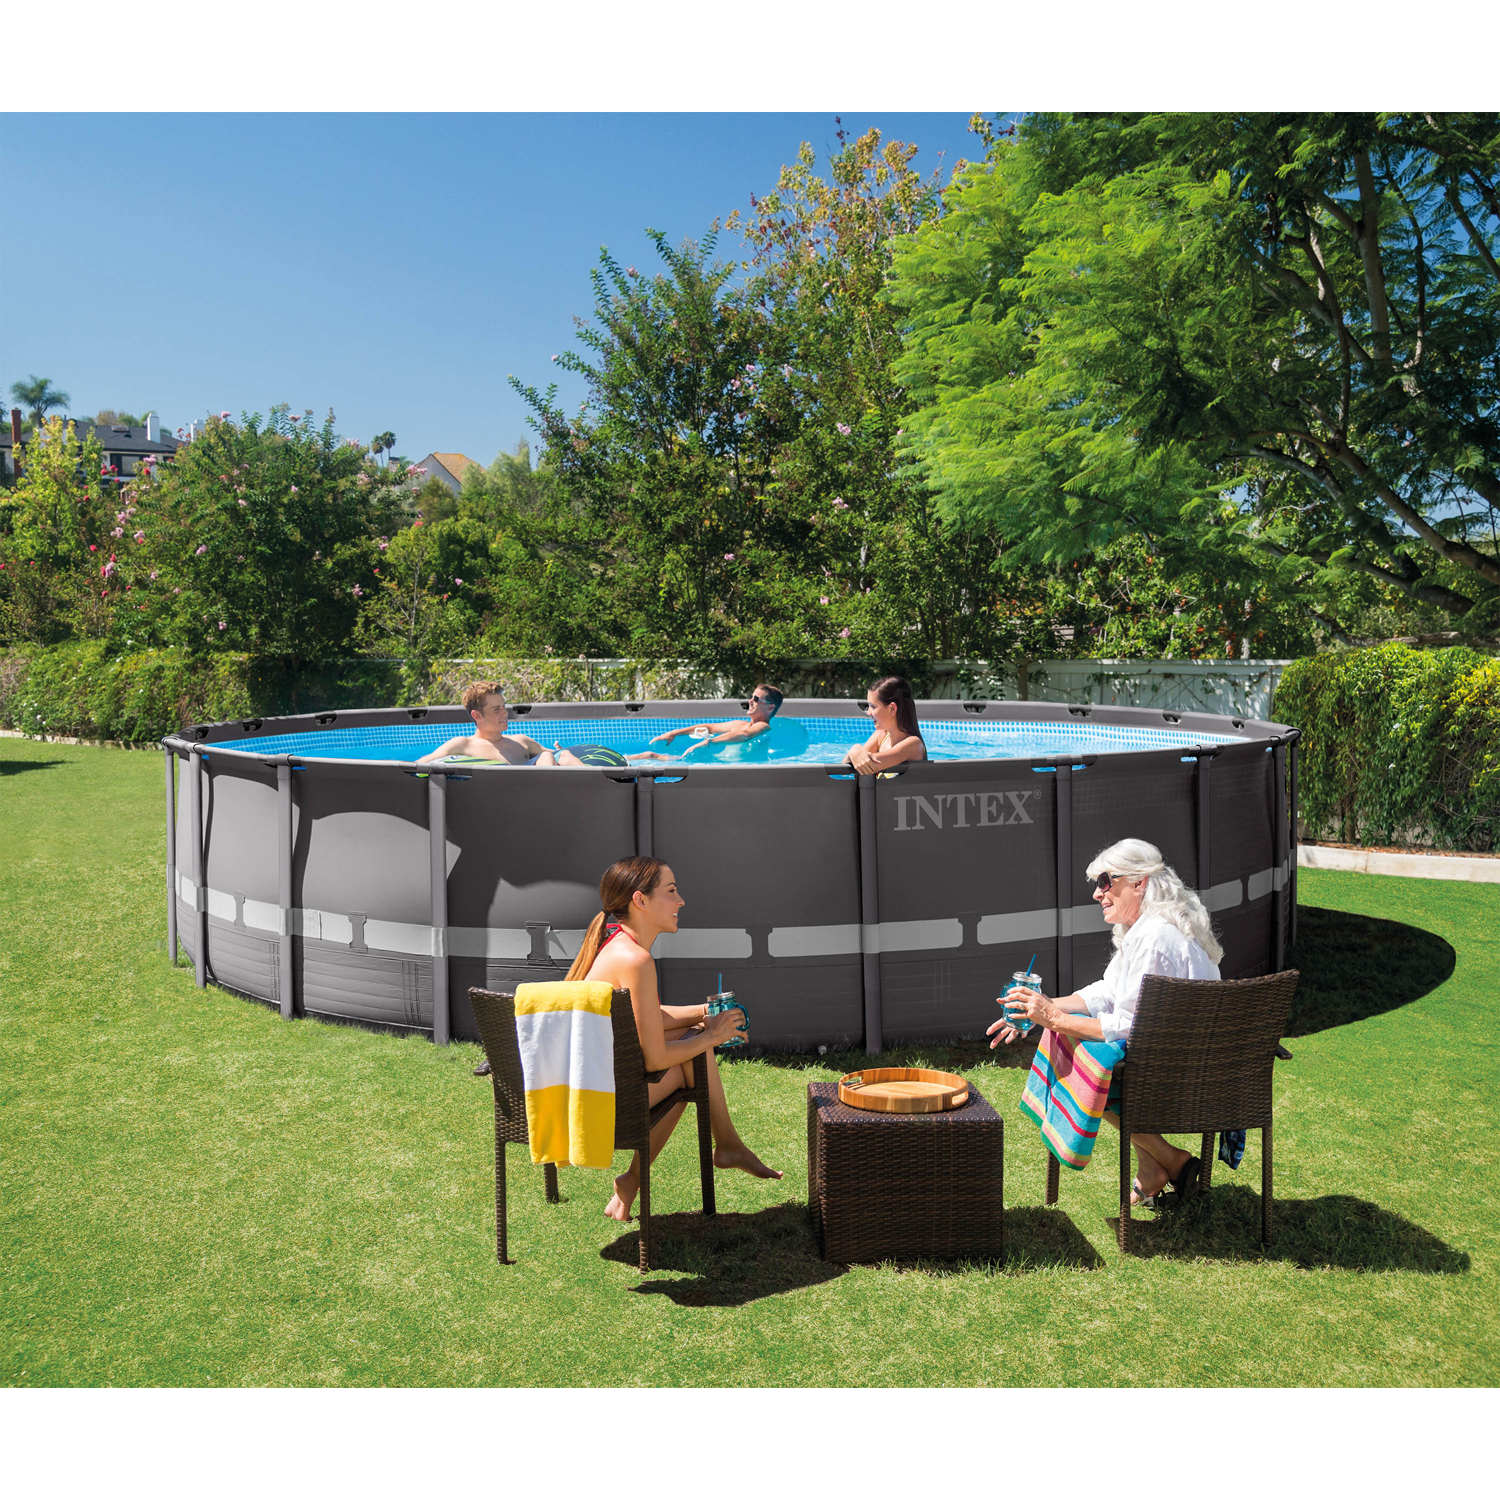 Intex 22′ x 52″ Ultra Frame Above Ground Pool with Filter Pump